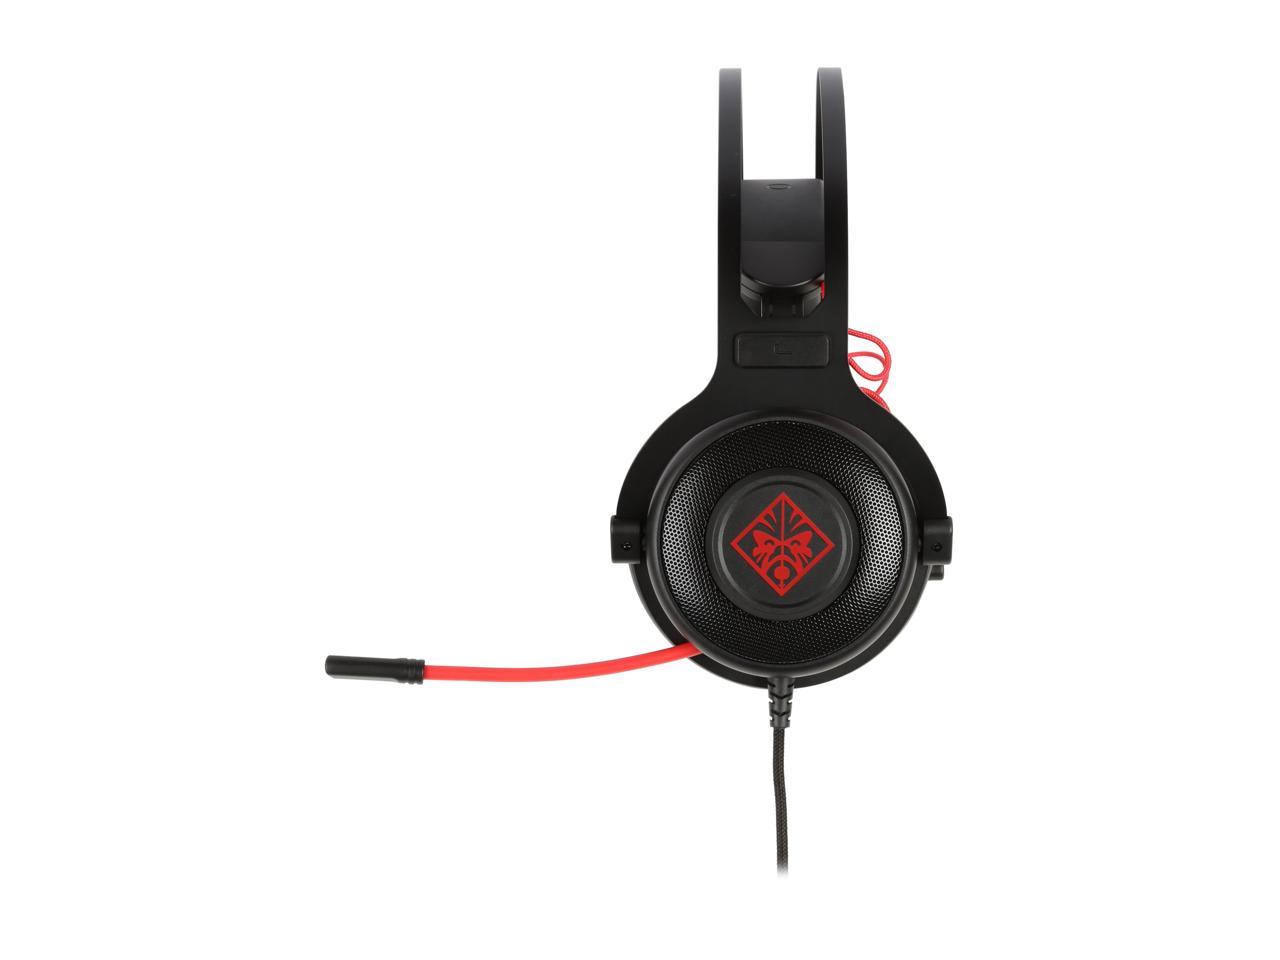 OMEN by HP Gaming Headset 800 with DTS Headphone:X Surround for PC, Mac, PS4, Xbox One